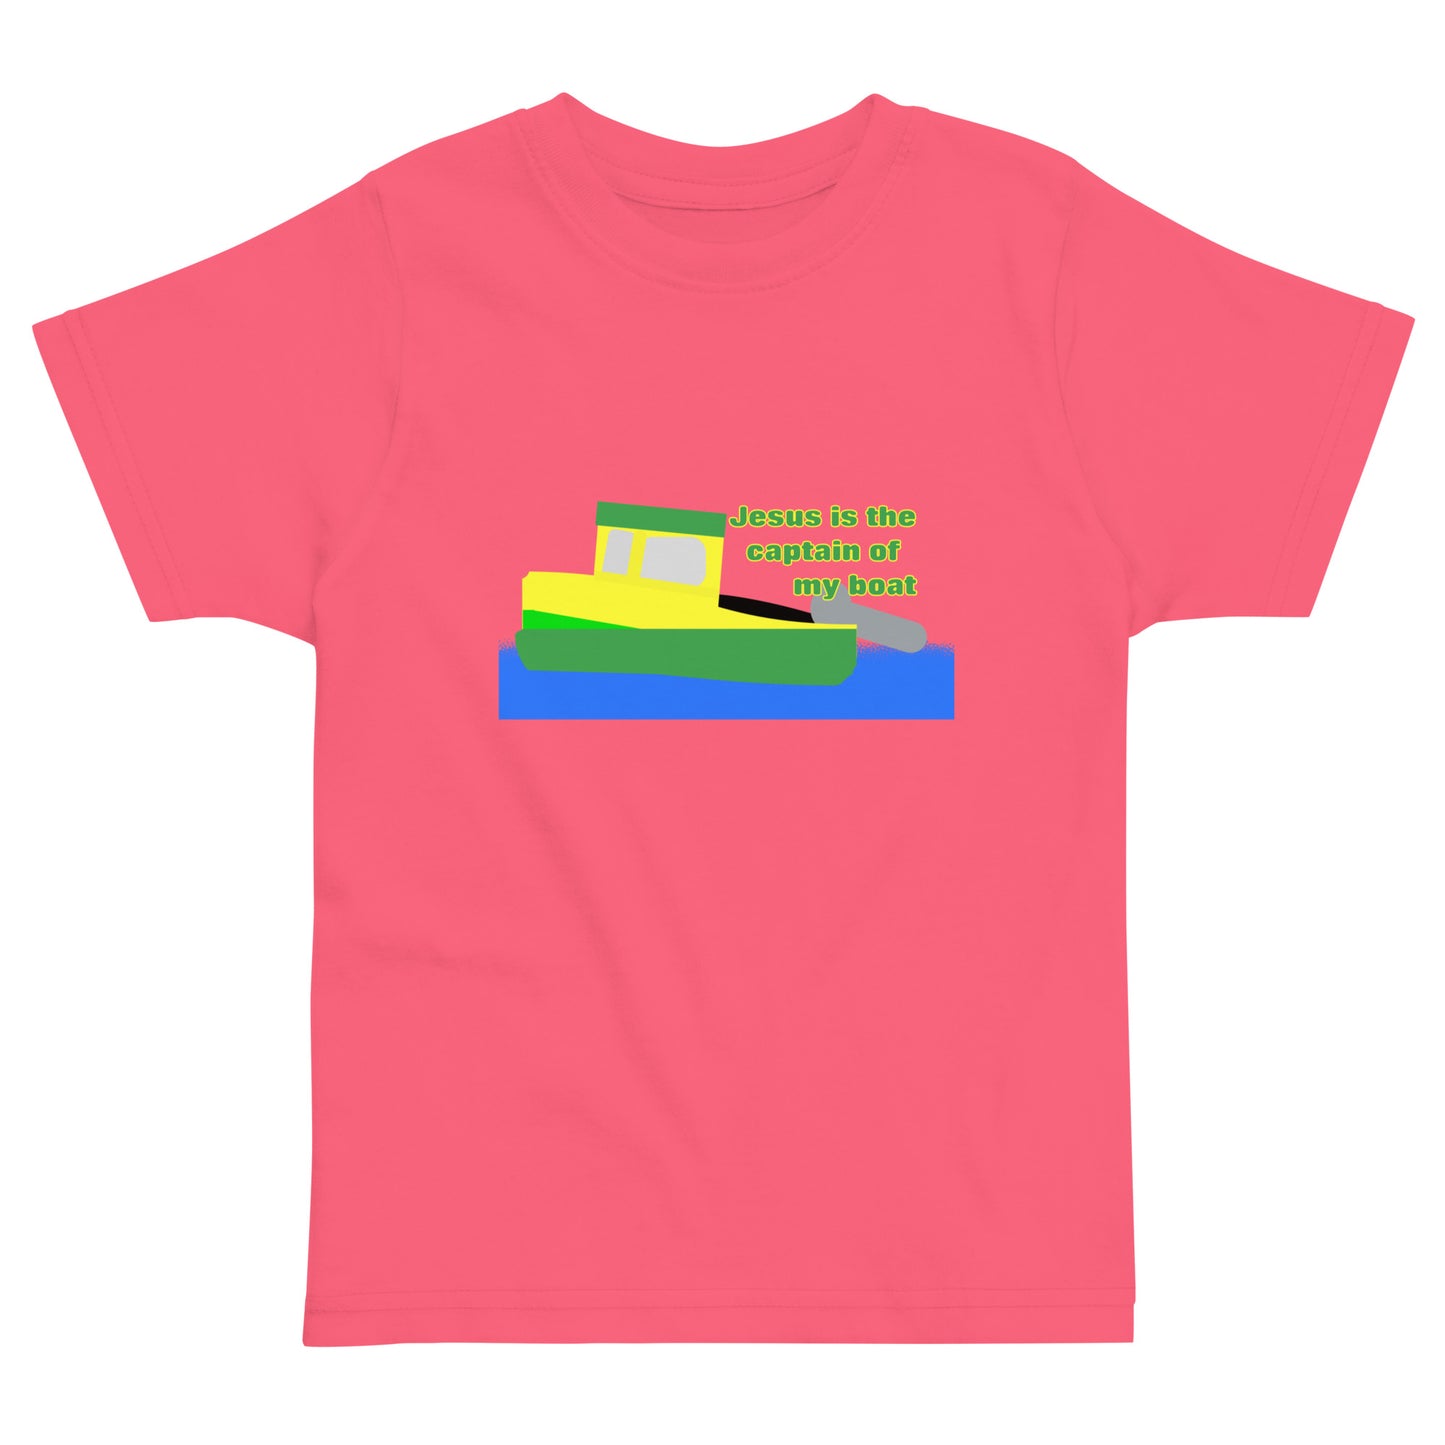 Jesus Is the Captain of My Boat (GY) Toddler T-Shirt